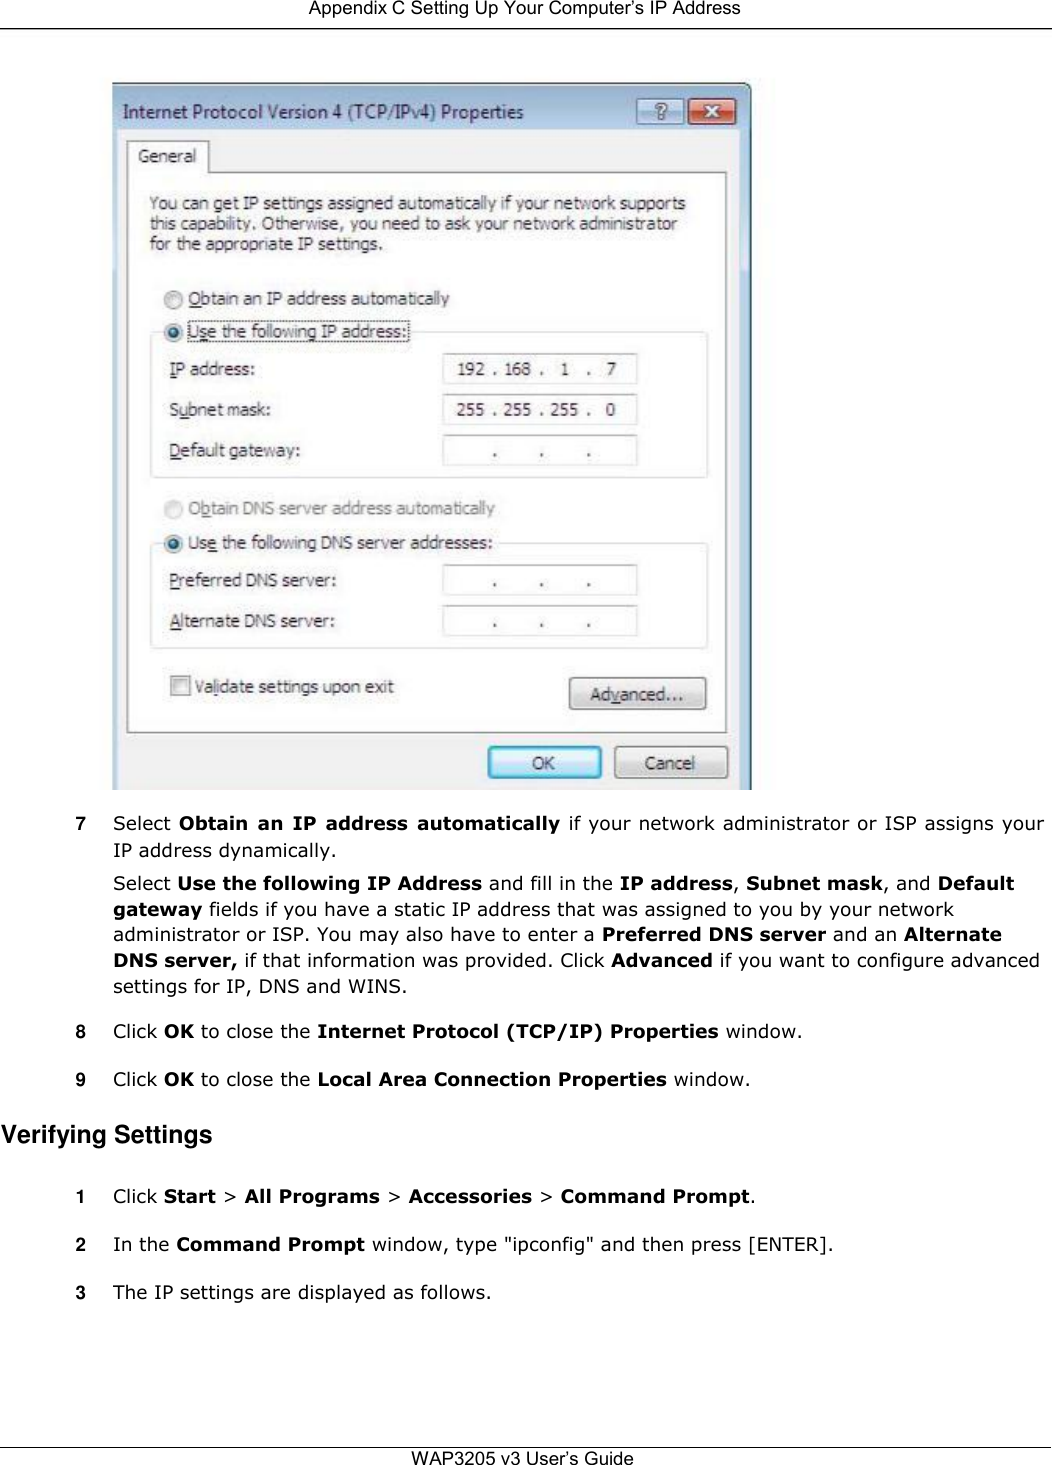  Appendix C Setting Up Your Computer’s IP Address                                       7  Select Obtain  an  IP  address  automatically if your network administrator or ISP assigns your IP address dynamically.  Select Use the following IP Address and fill in the IP address, Subnet mask, and Default gateway fields if you have a static IP address that was assigned to you by your network administrator or ISP. You may also have to enter a Preferred DNS server and an Alternate DNS server, if that information was provided. Click Advanced if you want to configure advanced settings for IP, DNS and WINS.  8  Click OK to close the Internet Protocol (TCP/IP) Properties window.  9  Click OK to close the Local Area Connection Properties window.  Verifying Settings  1  Click Start &gt; All Programs &gt; Accessories &gt; Command Prompt.  2  In the Command Prompt window, type &quot;ipconfig&quot; and then press [ENTER].  3  The IP settings are displayed as follows.       WAP3205 v3 User’s Guide 